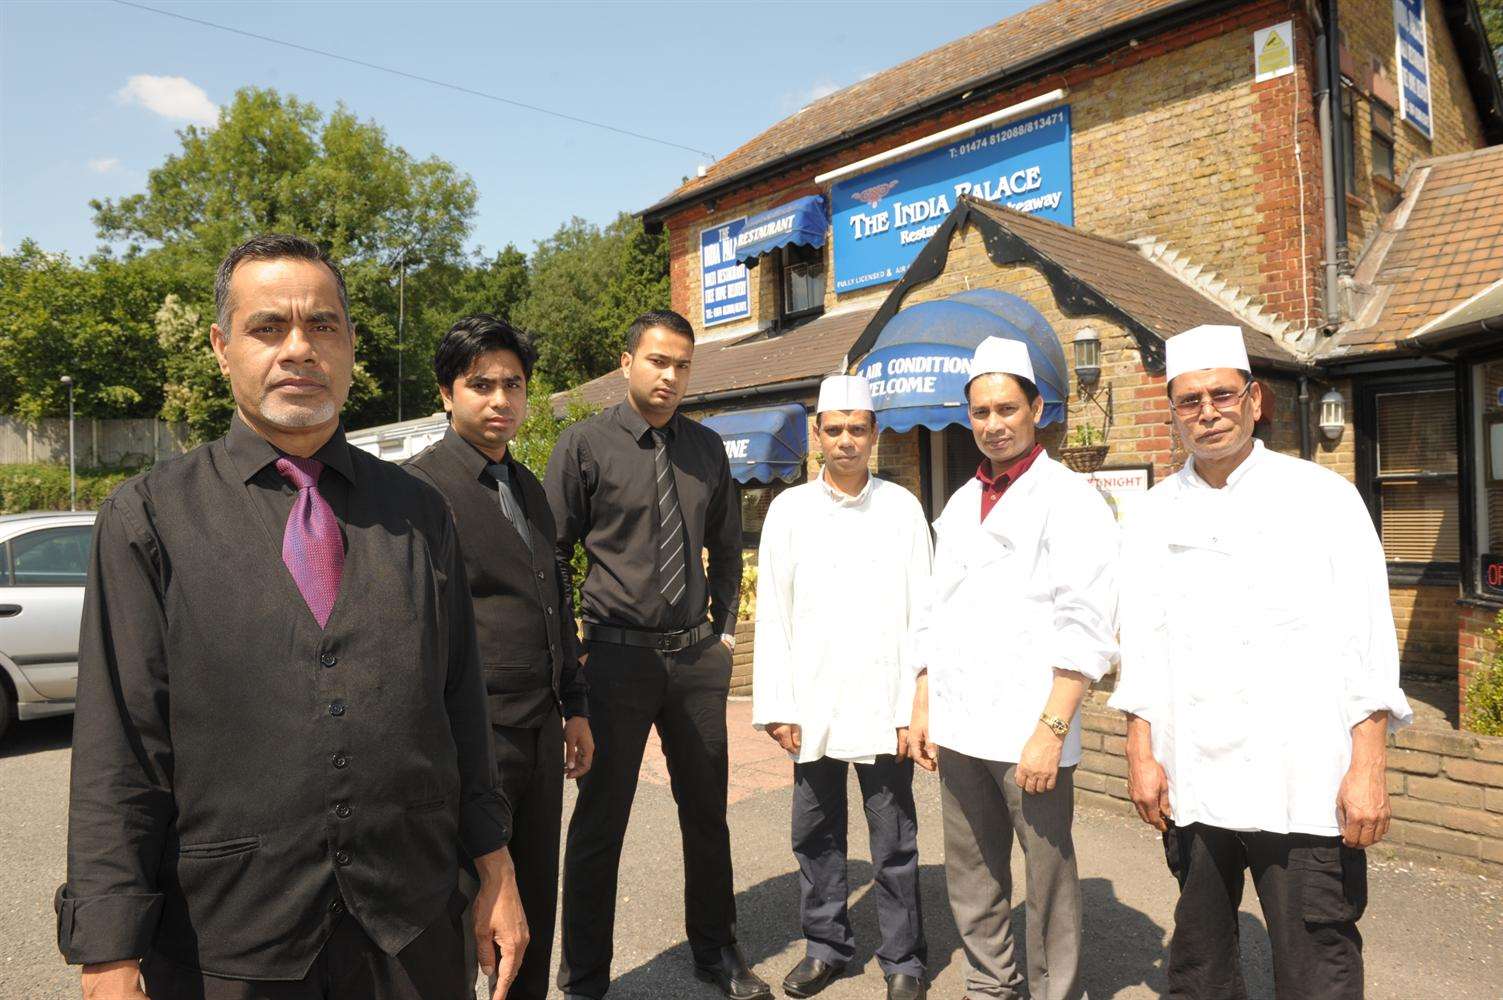 The India Palace team